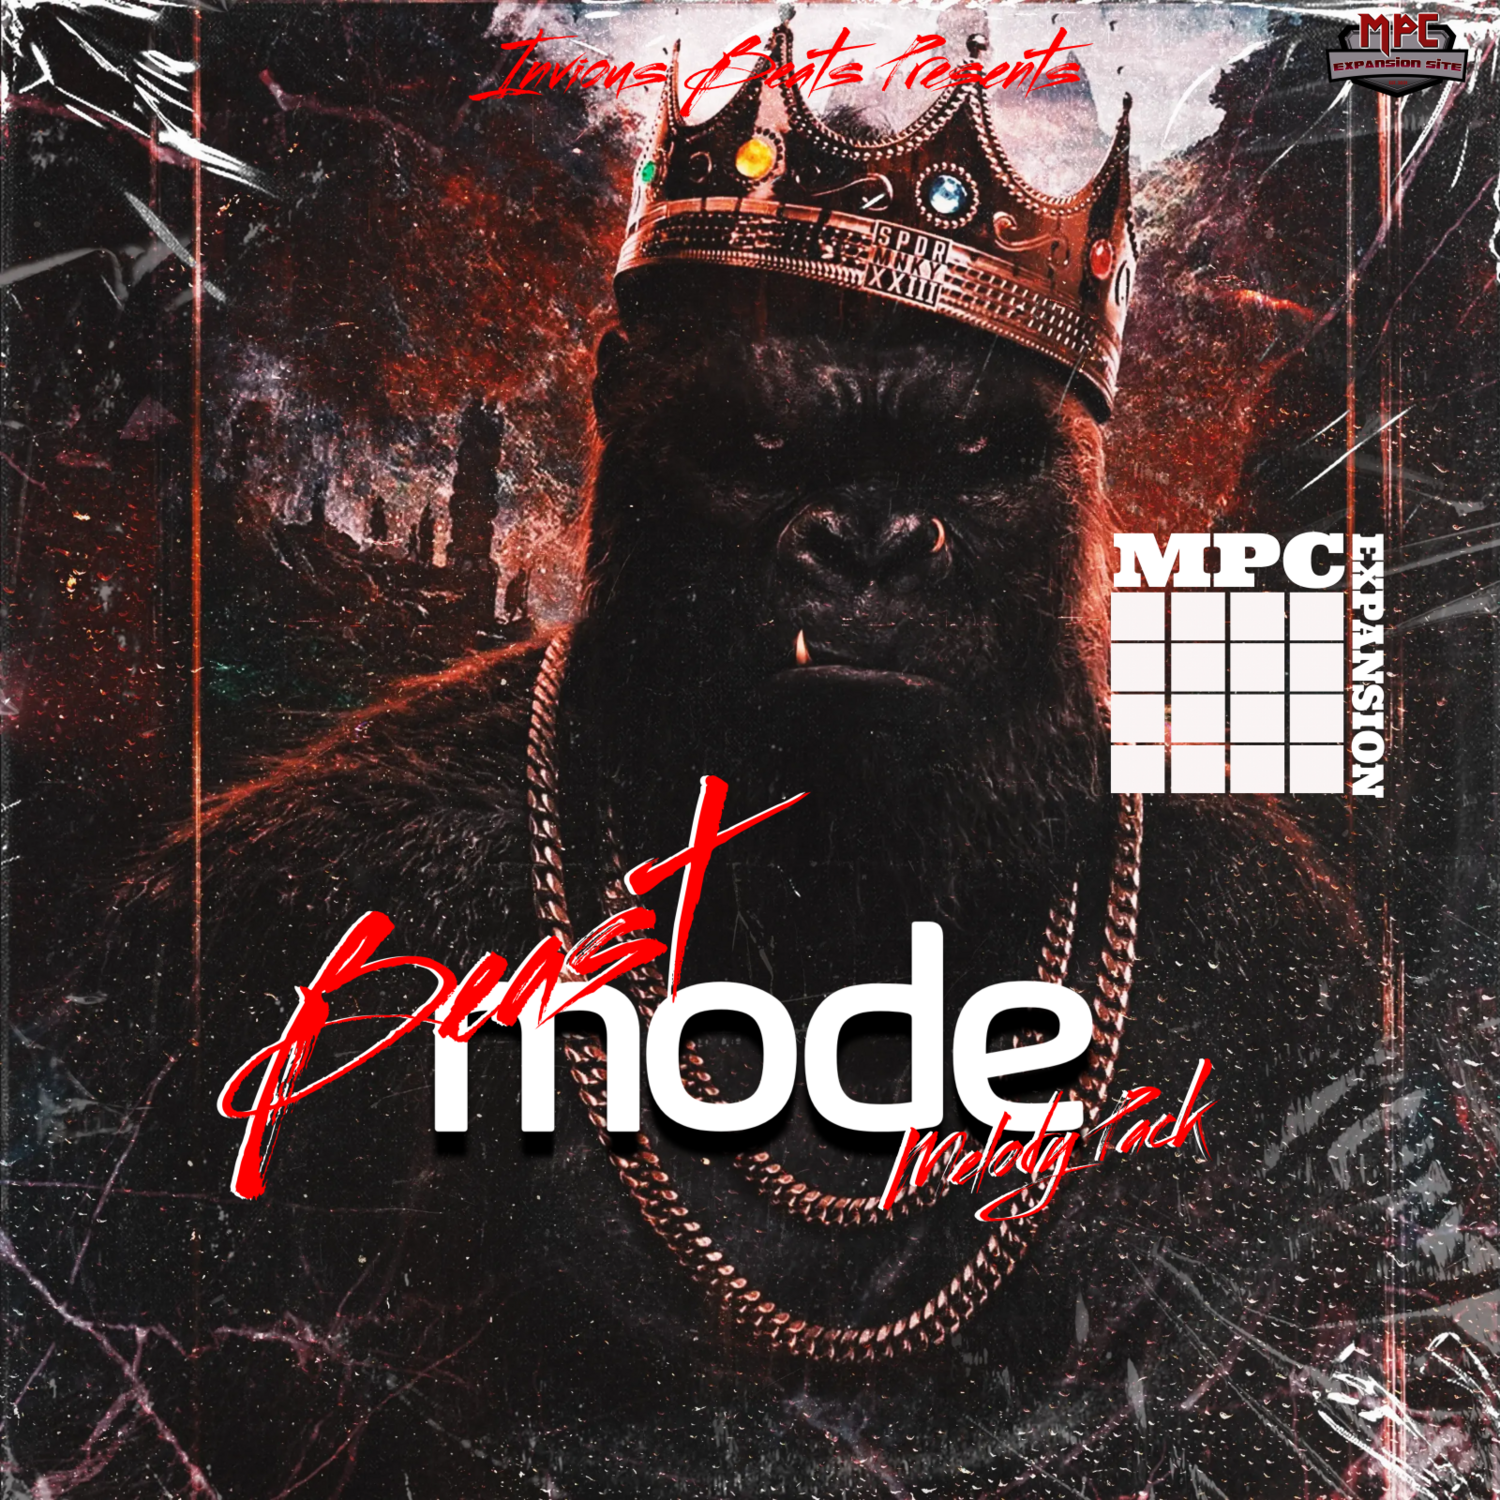 MPC EXPANSION 'BEAST MODE' by INVIOUS